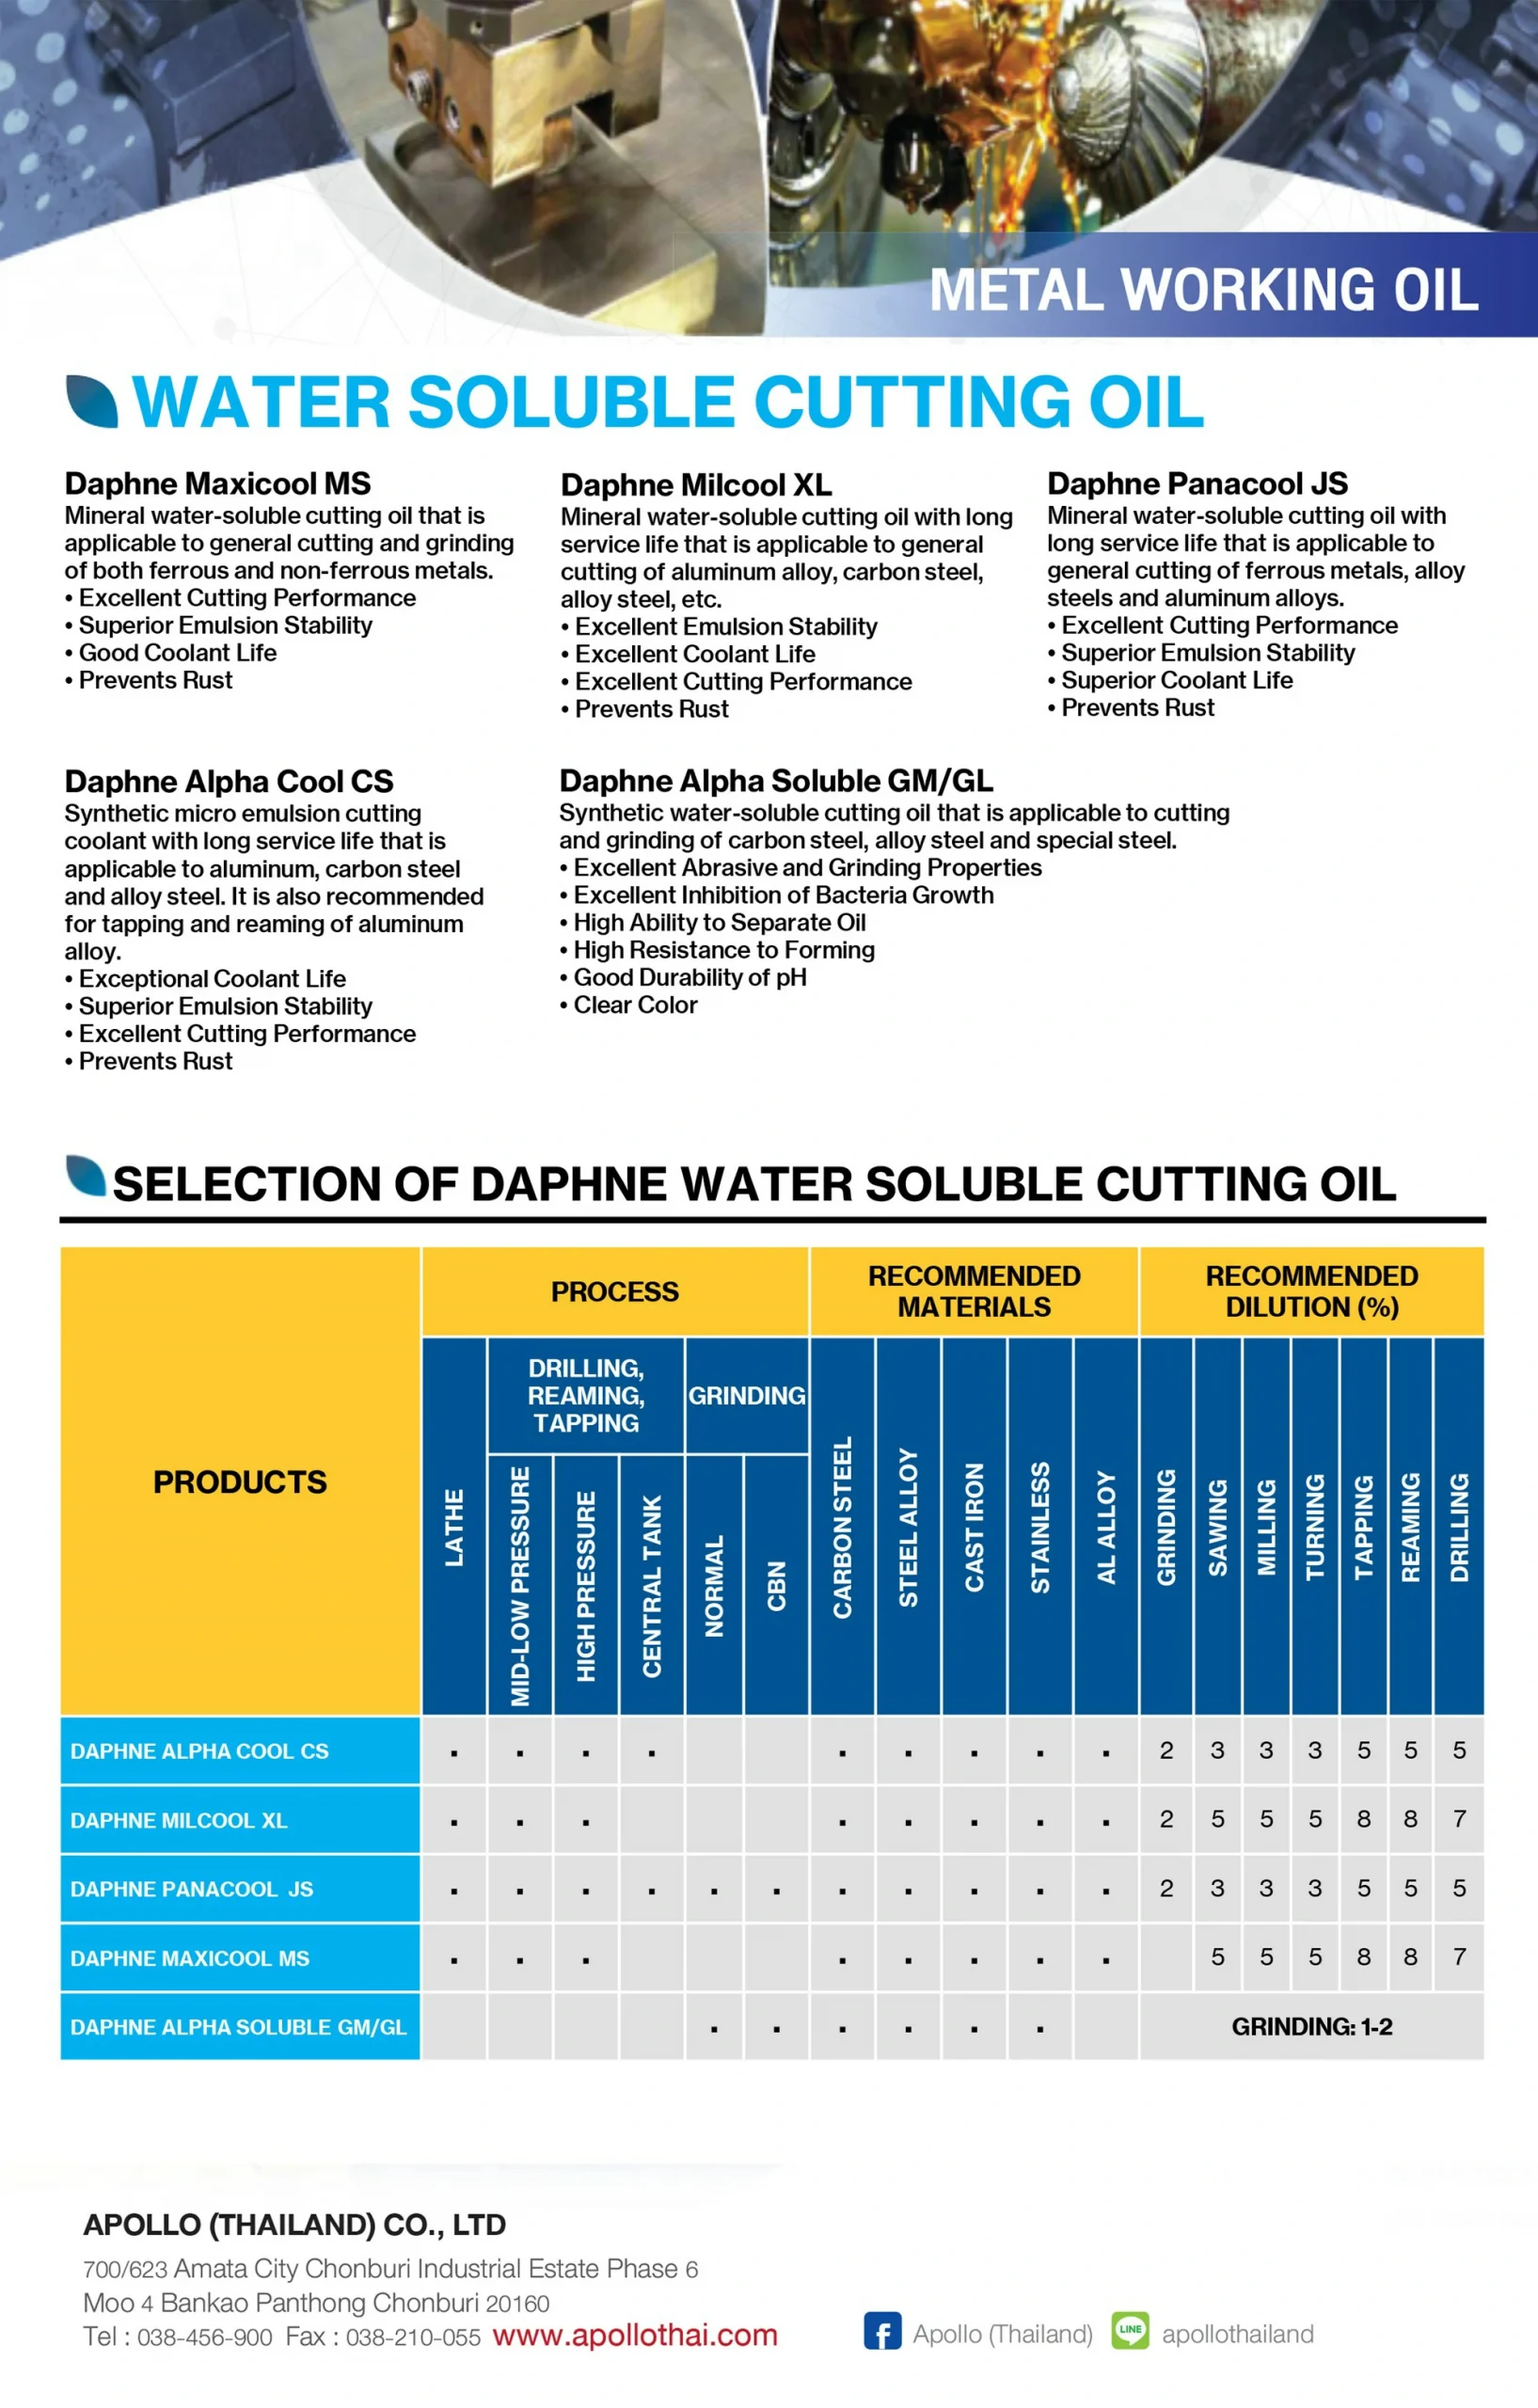 WATER SOLUBLE CUTTING OIL